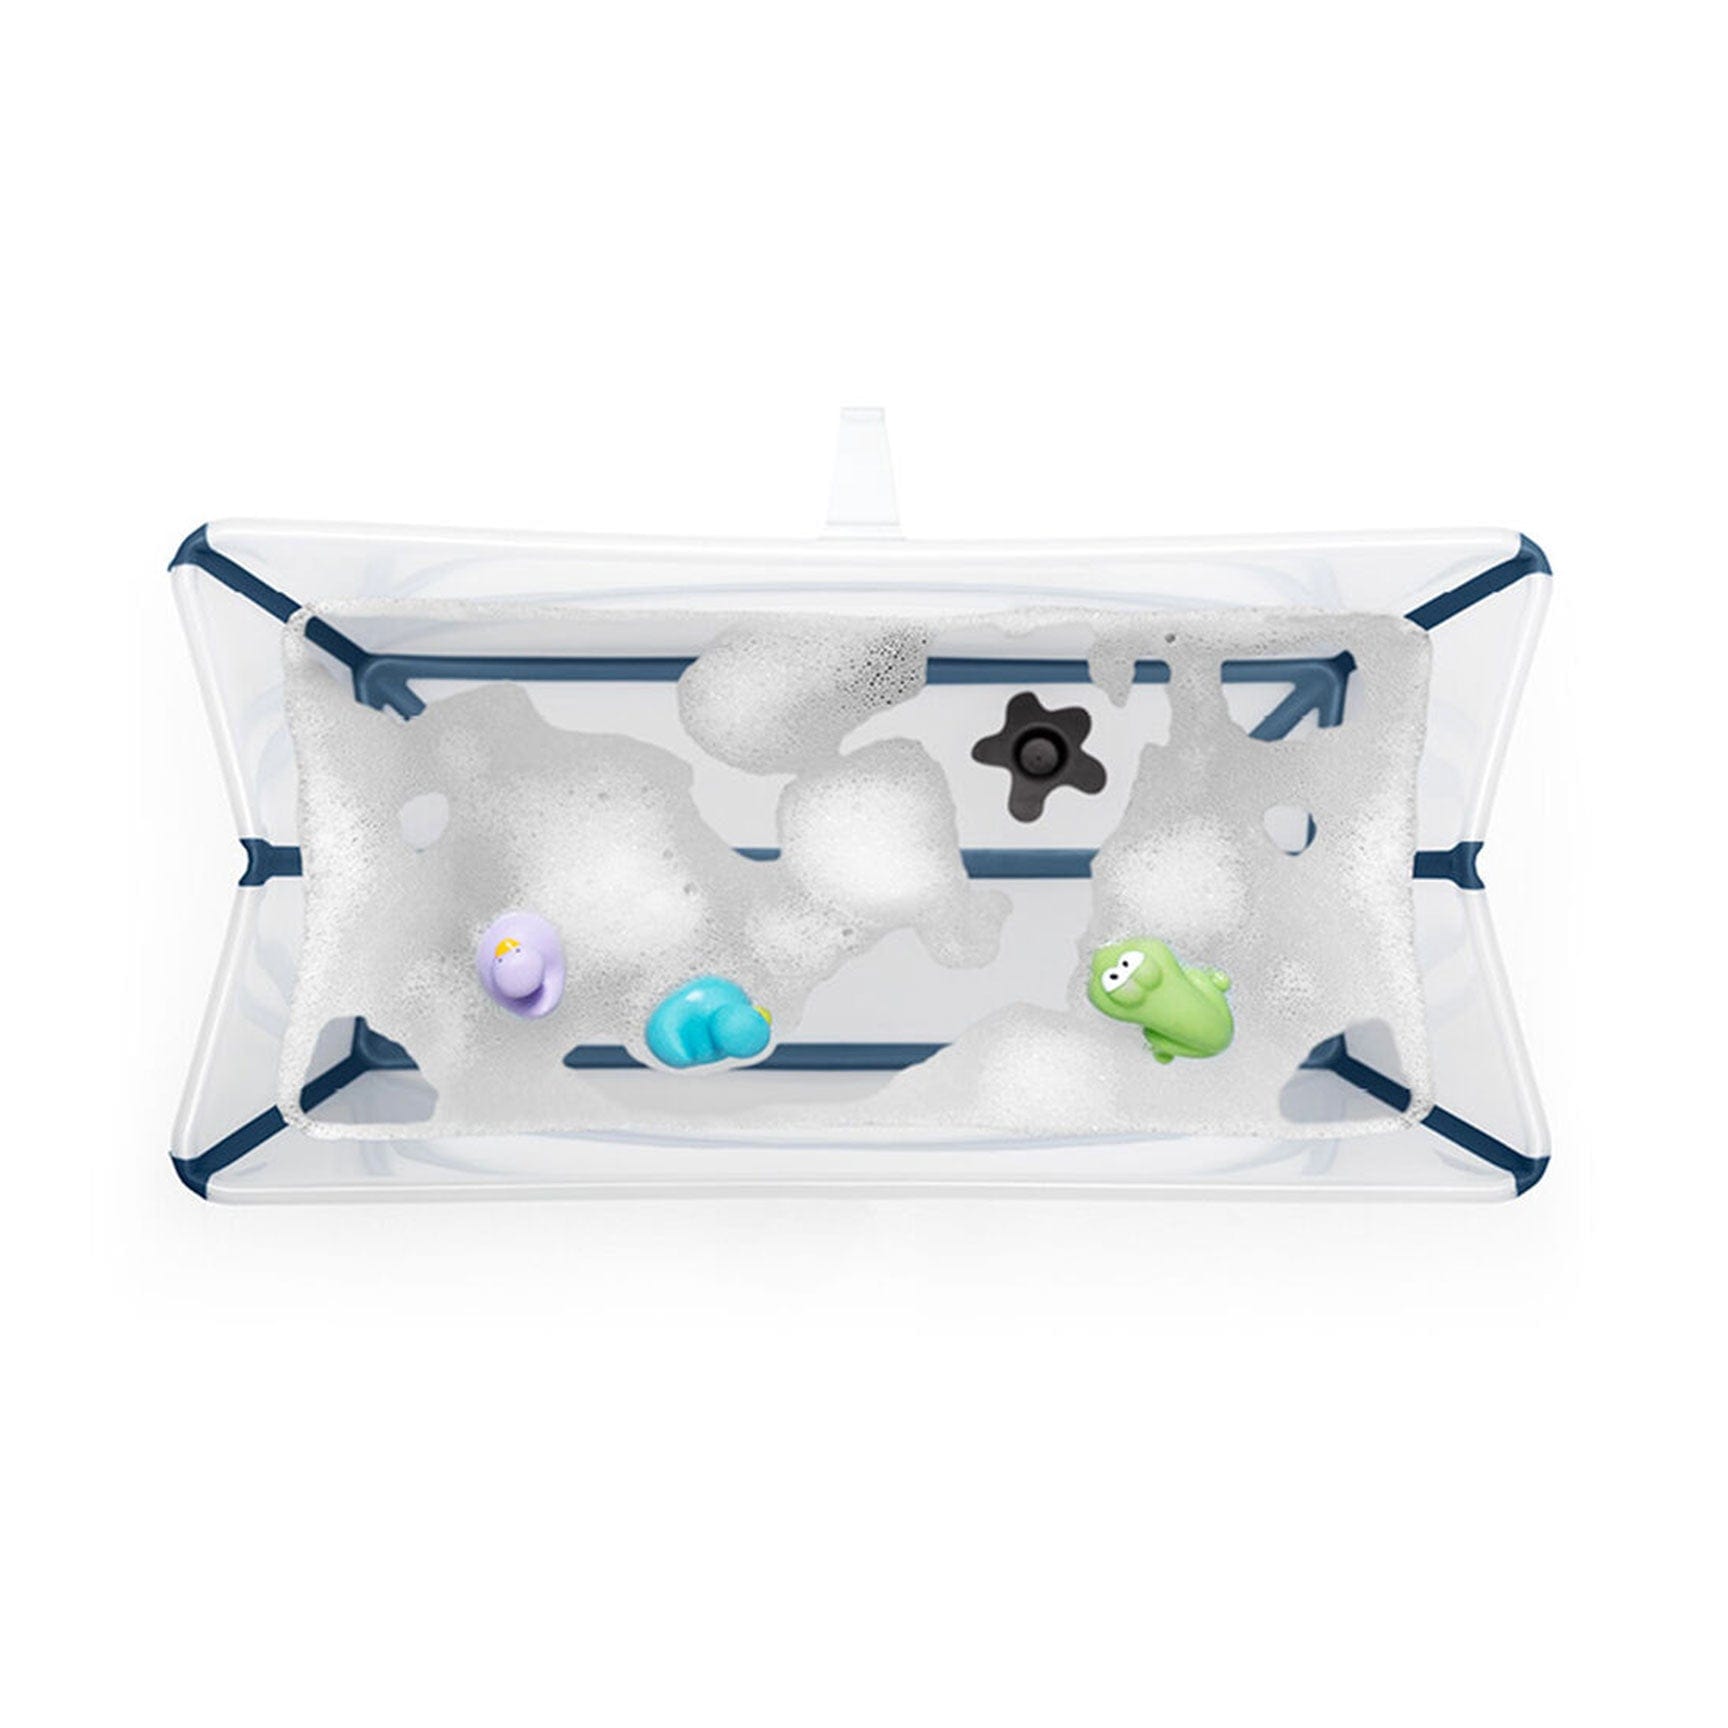 Stokke Flexi Bath® X-Large with Newborn Support in Transparent Blue Bathing & Grooming 639602 7040356396023